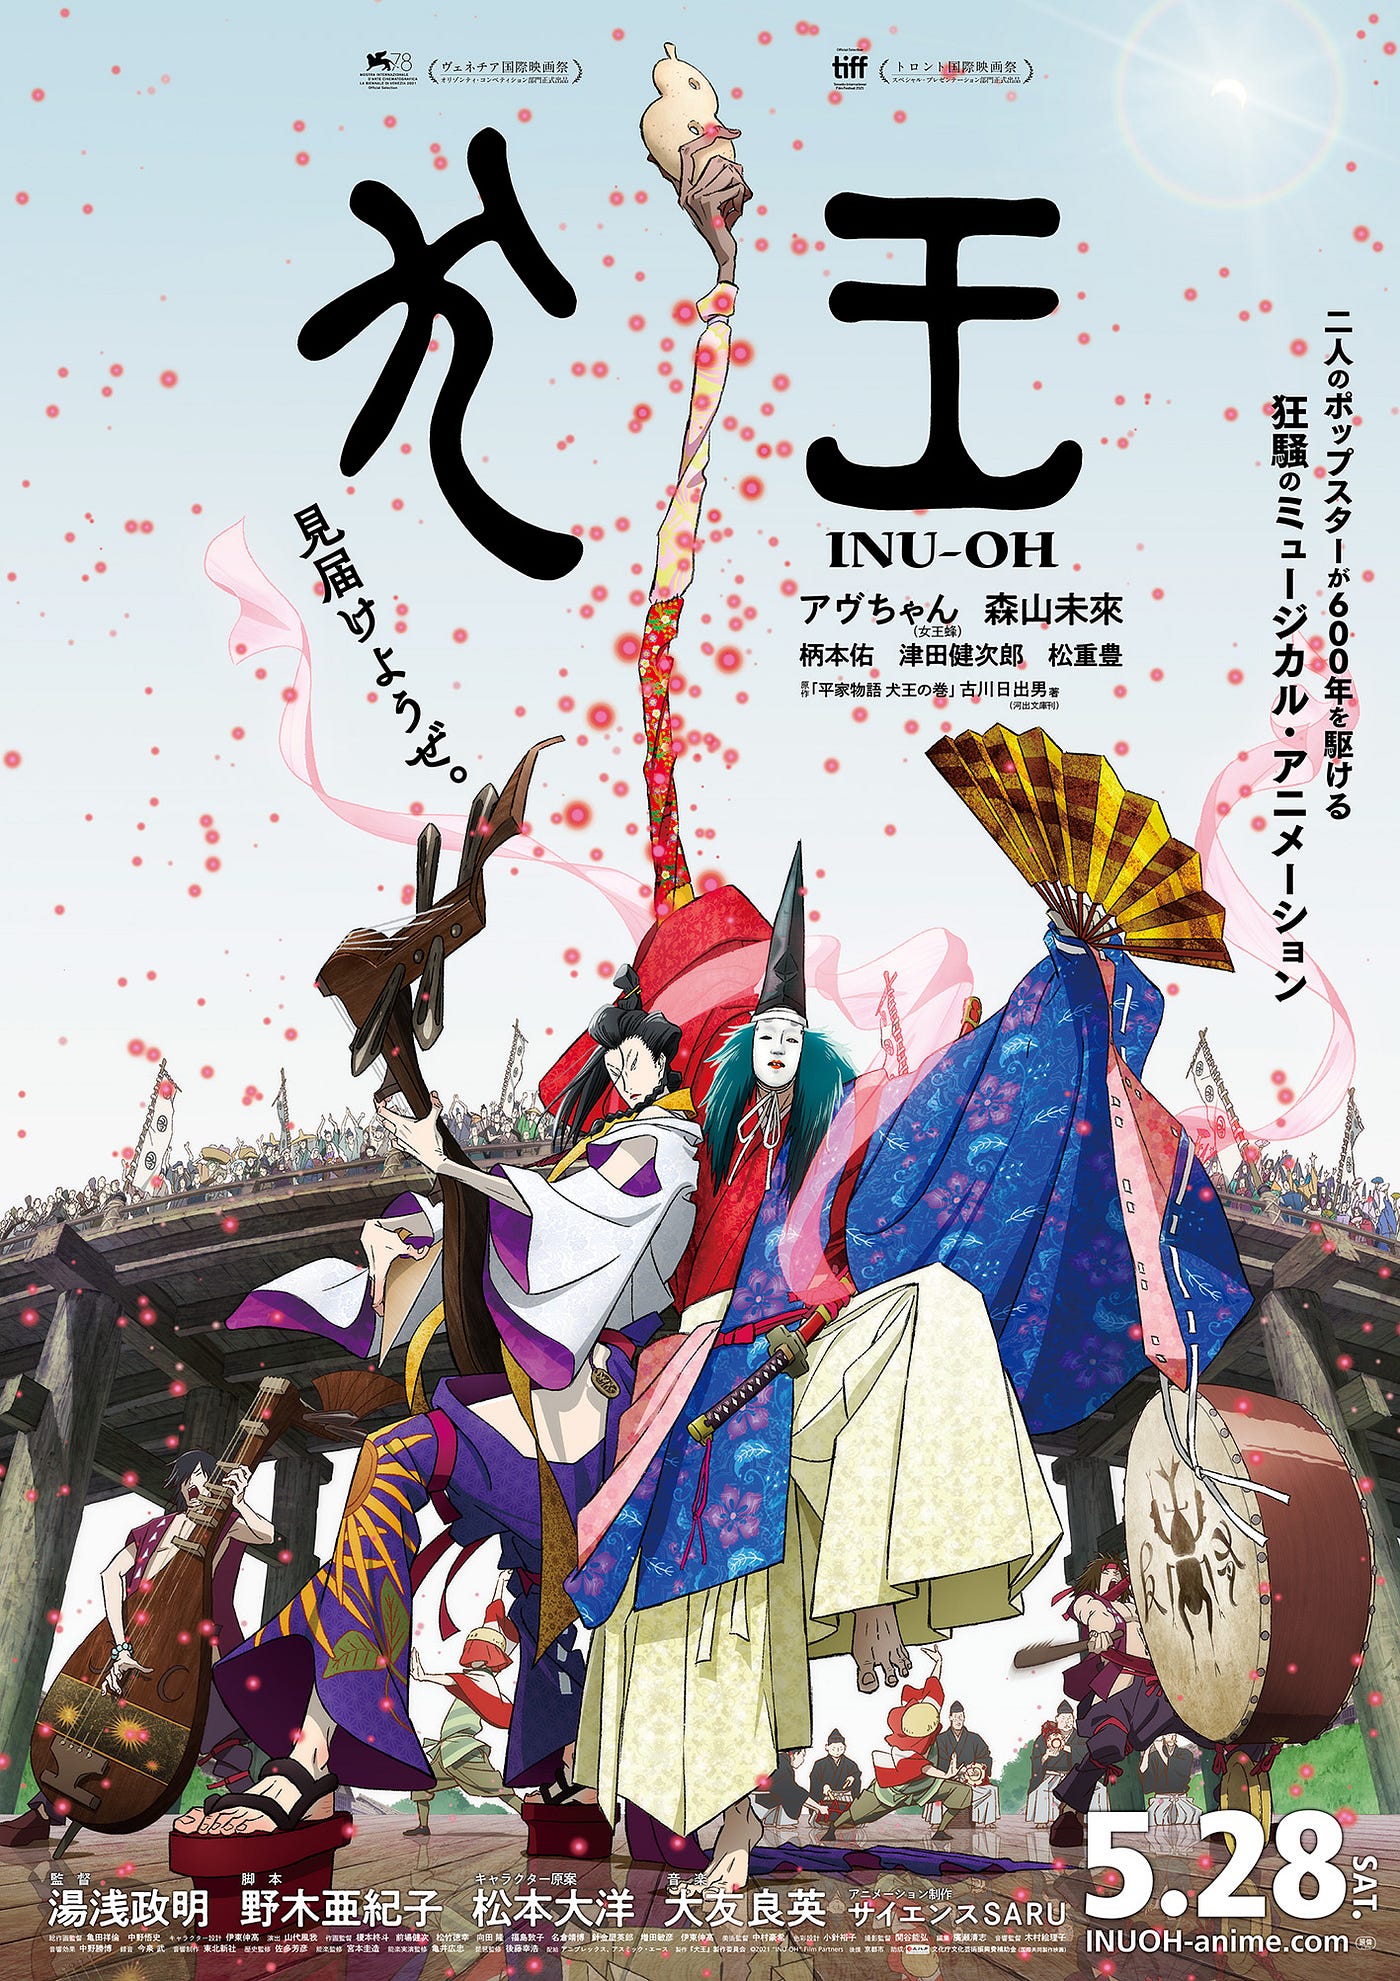 Inu-Oh Infuses a Classical Japanese Tale With Rock 'n' Roll